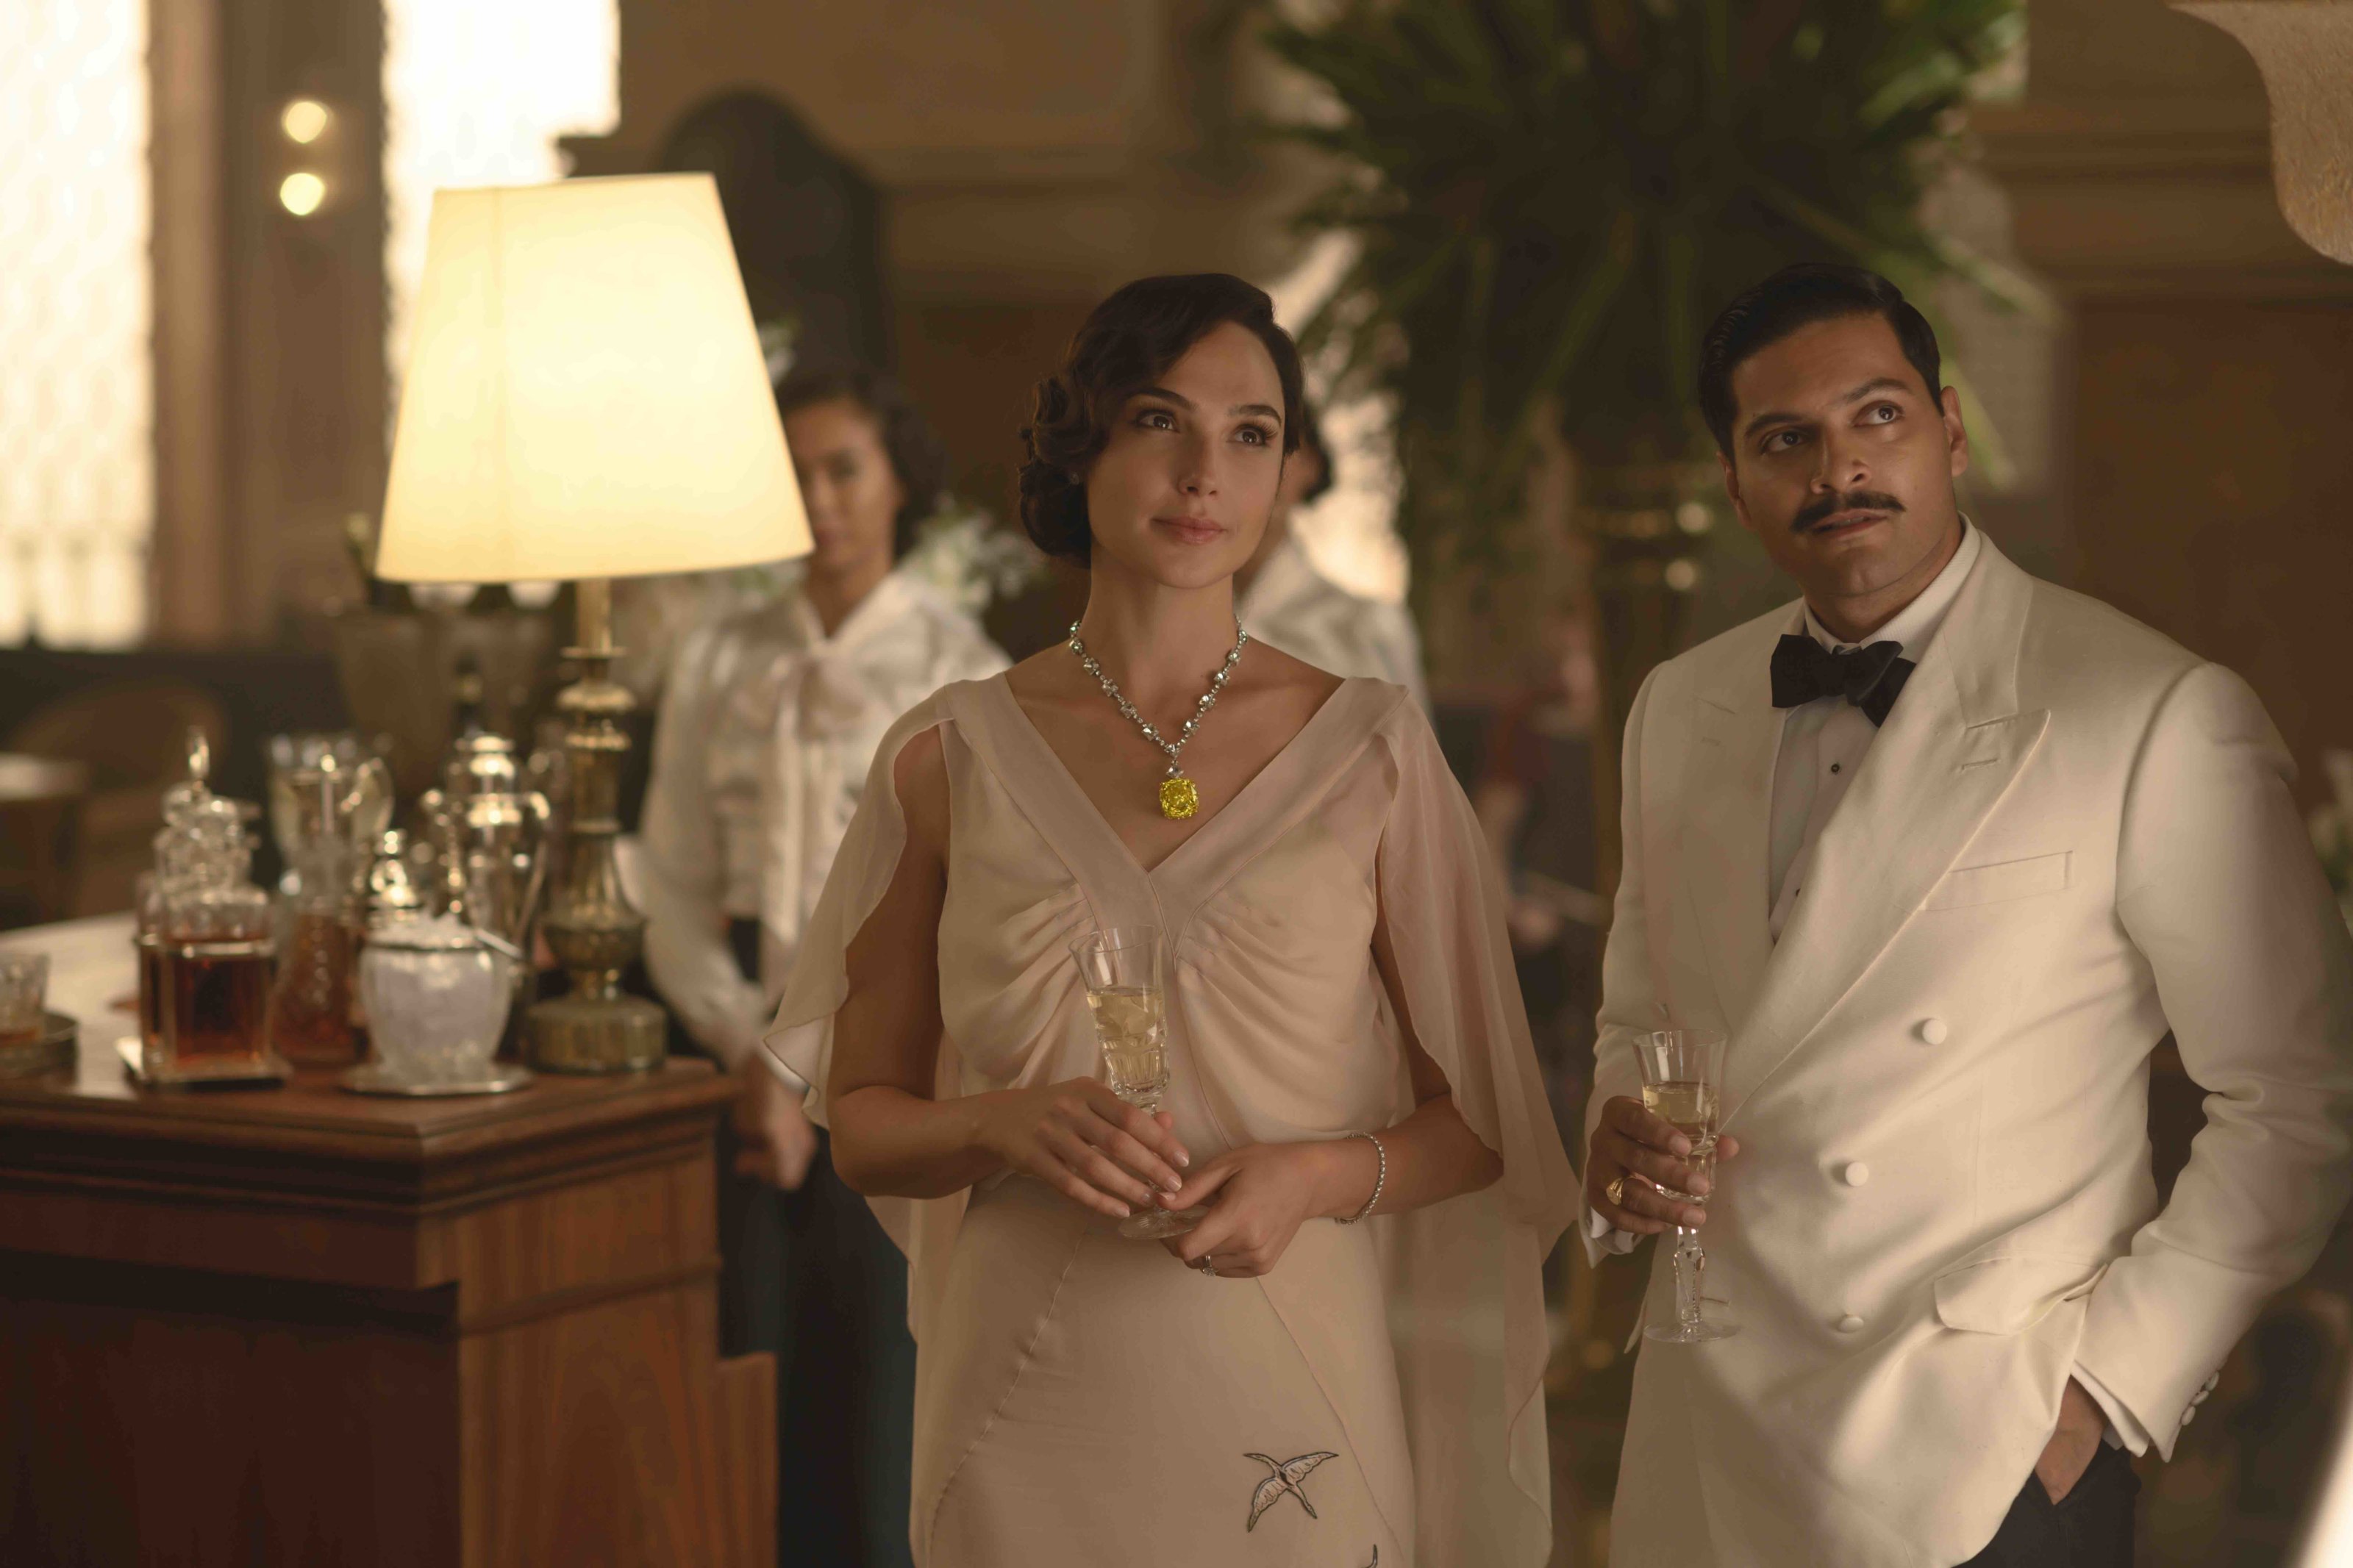 128-carat yellow Tiffany diamond necklace worn by Gal Gadot in the Death on The Nile movie